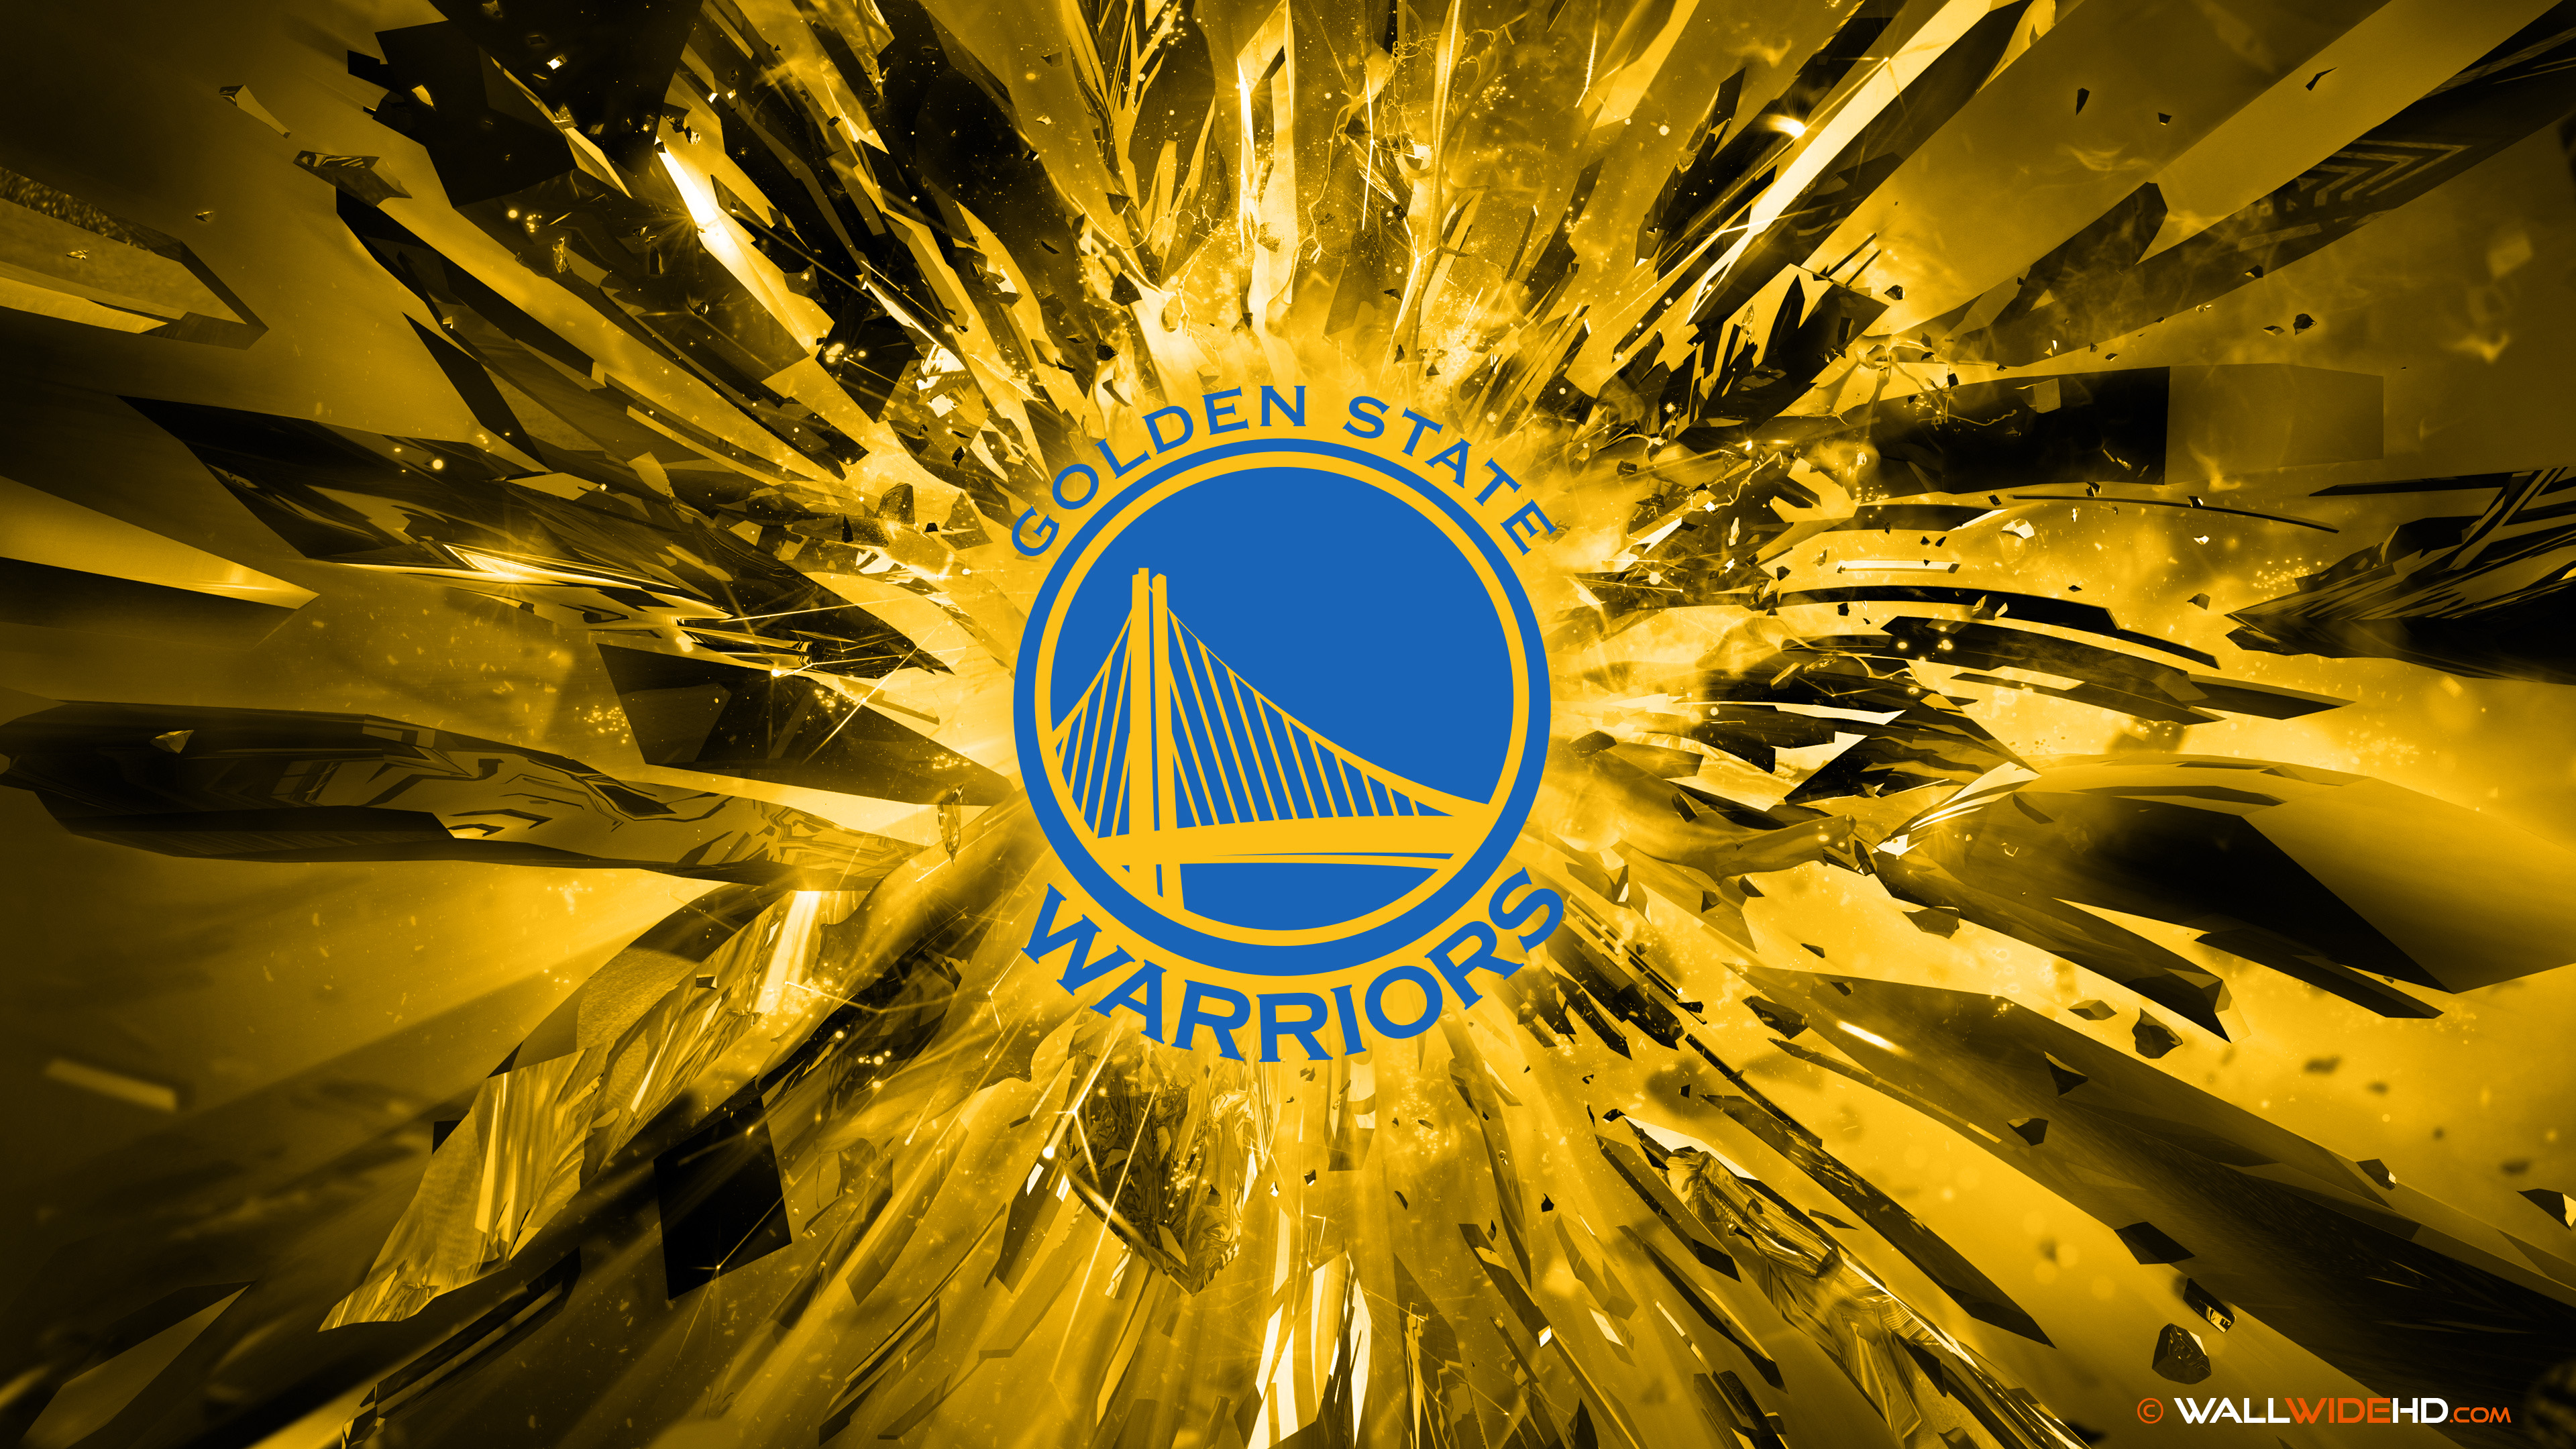 Free Download Golden State Warriors Wallpaper Hd 3840x2160 For Your Desktop Mobile Tablet Explore 97 Golden State Warriors Champions Wallpapers Golden State Warriors Champions Wallpapers Golden State Warriors Champions